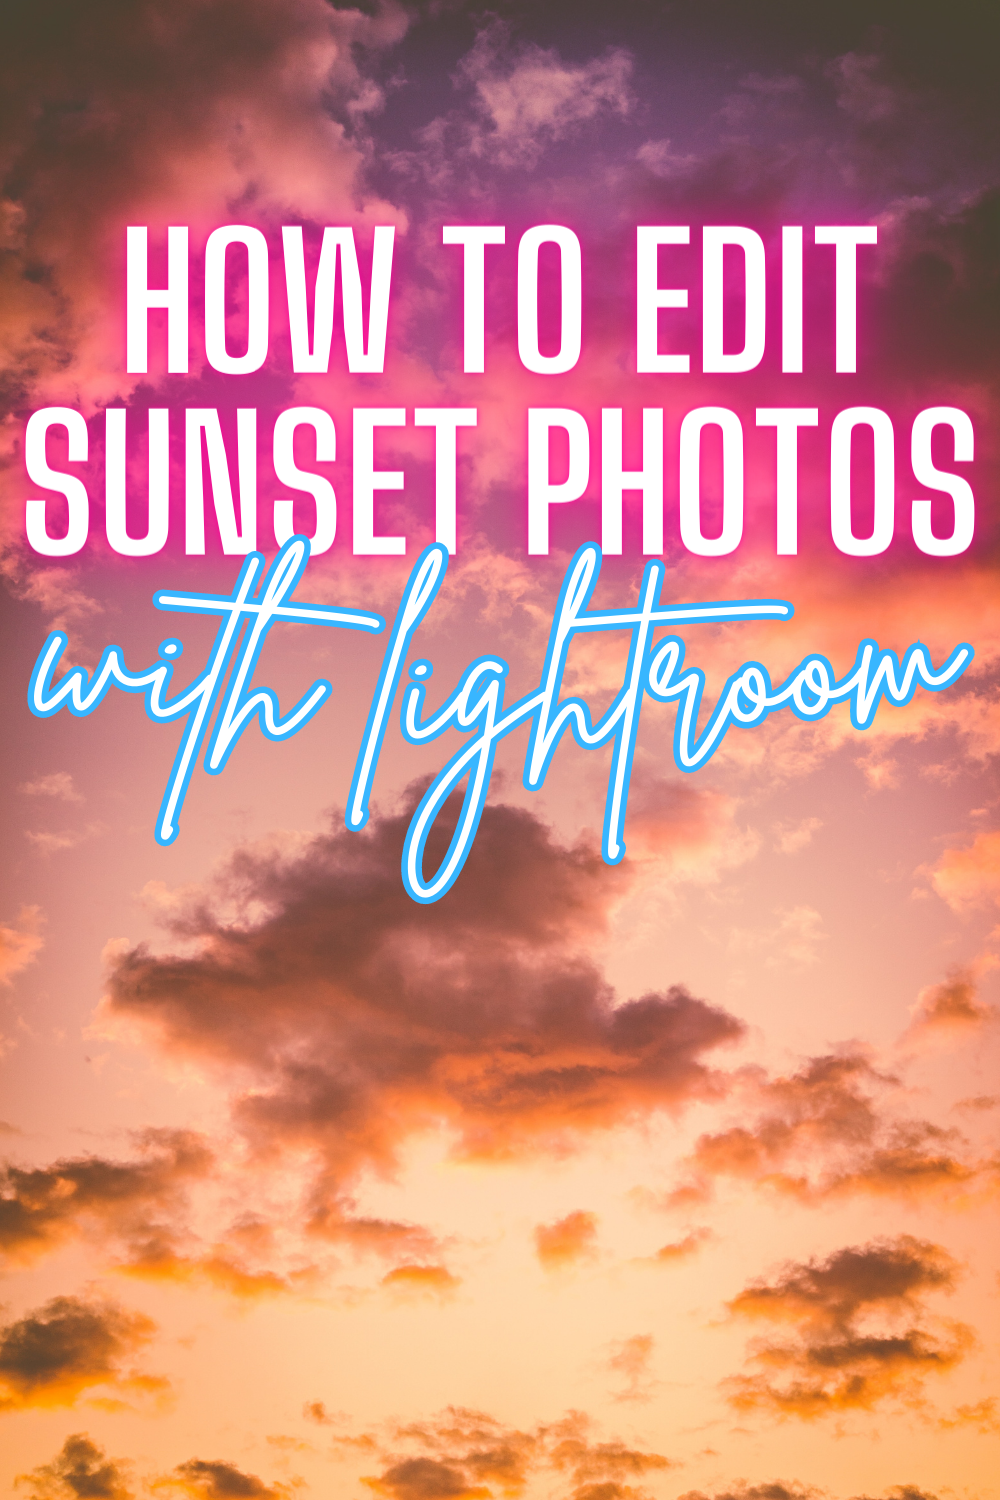 How To Edit Sunset Photos With Lightroom